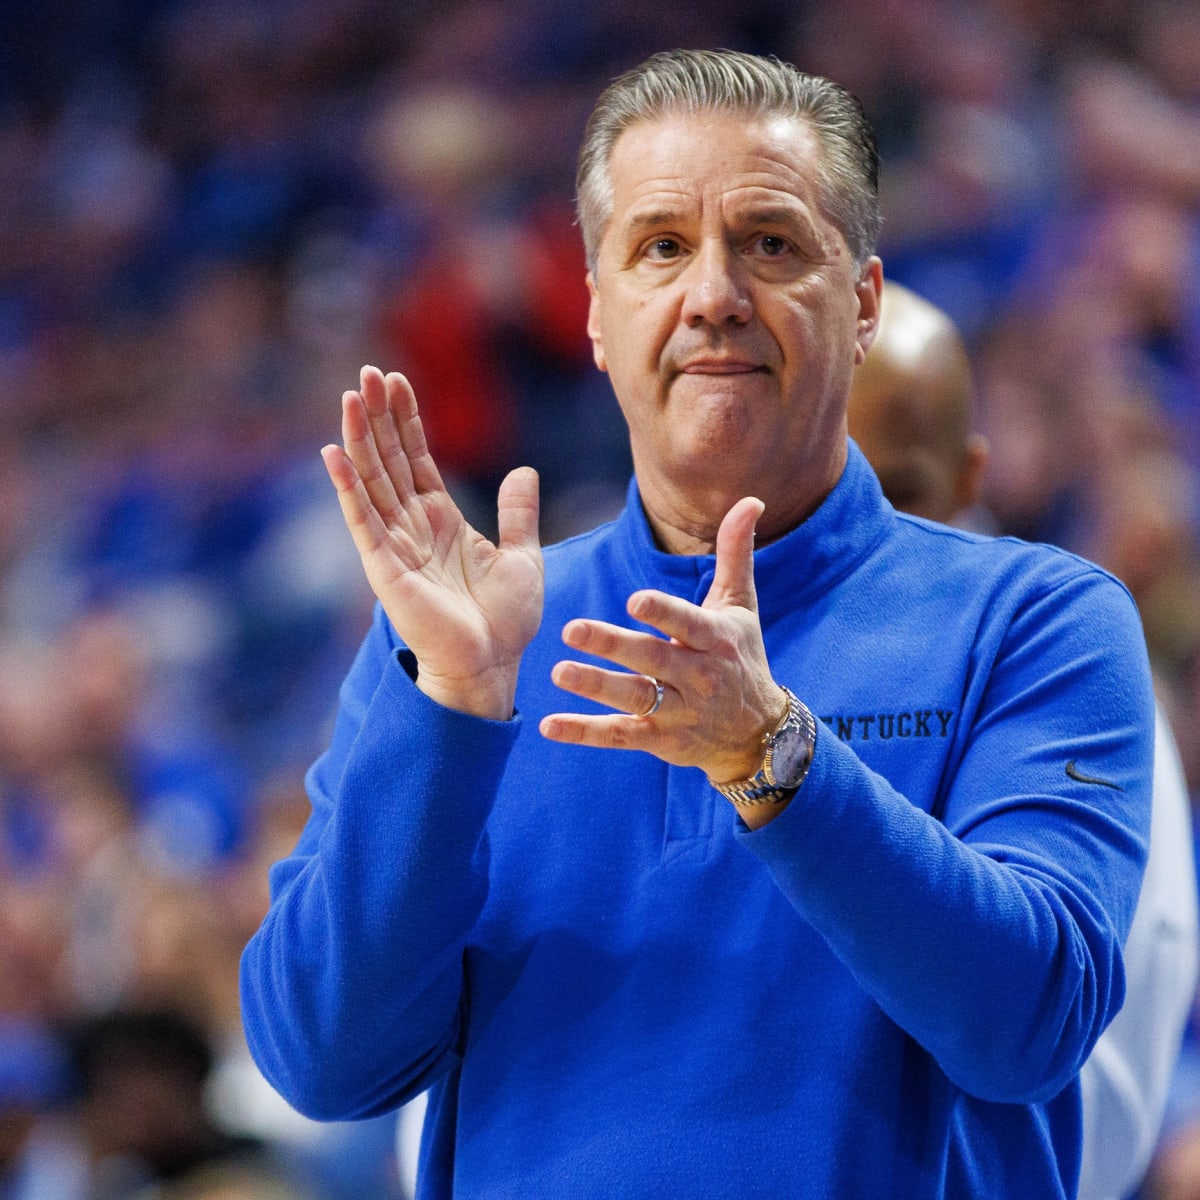 It takes time': Coach Calipari talks about his team after win over  Louisville